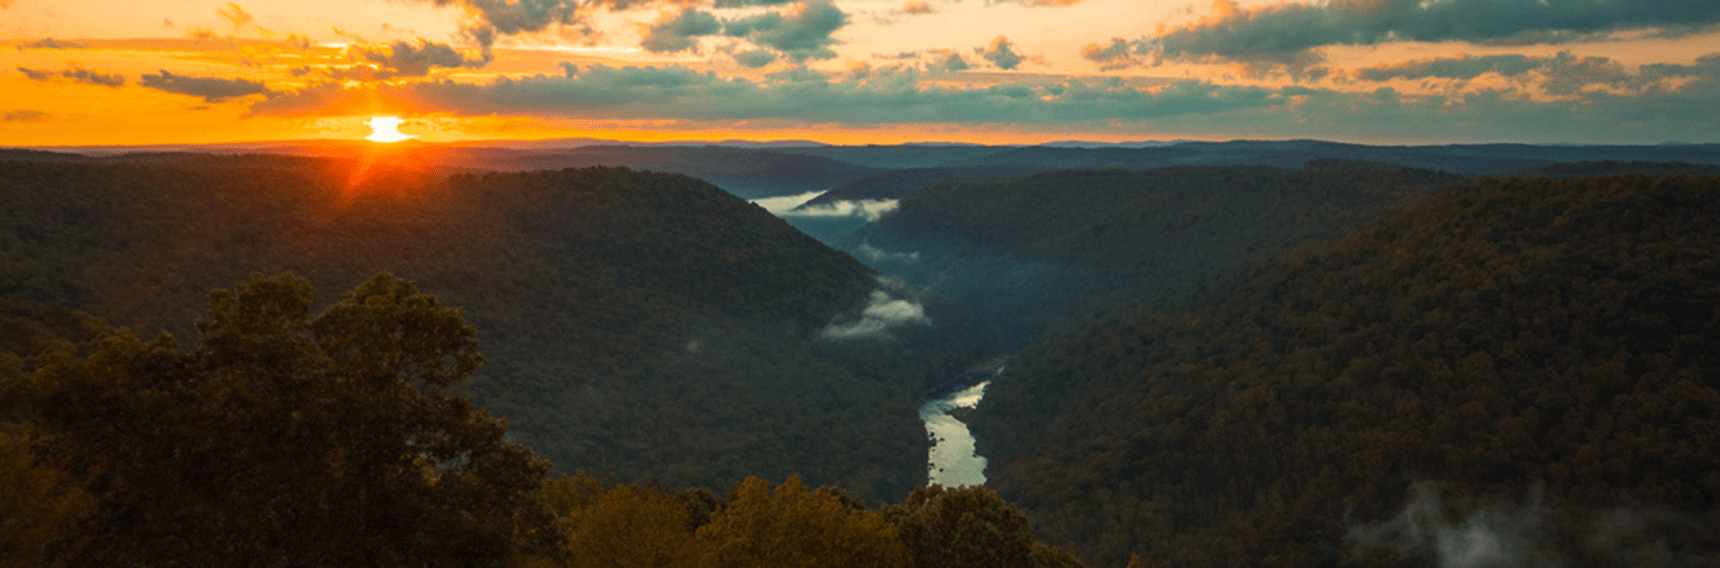 Sunrise over the Appalachian mountains in Coopers Rock State Park. Photo by WVU student Mark Webb.